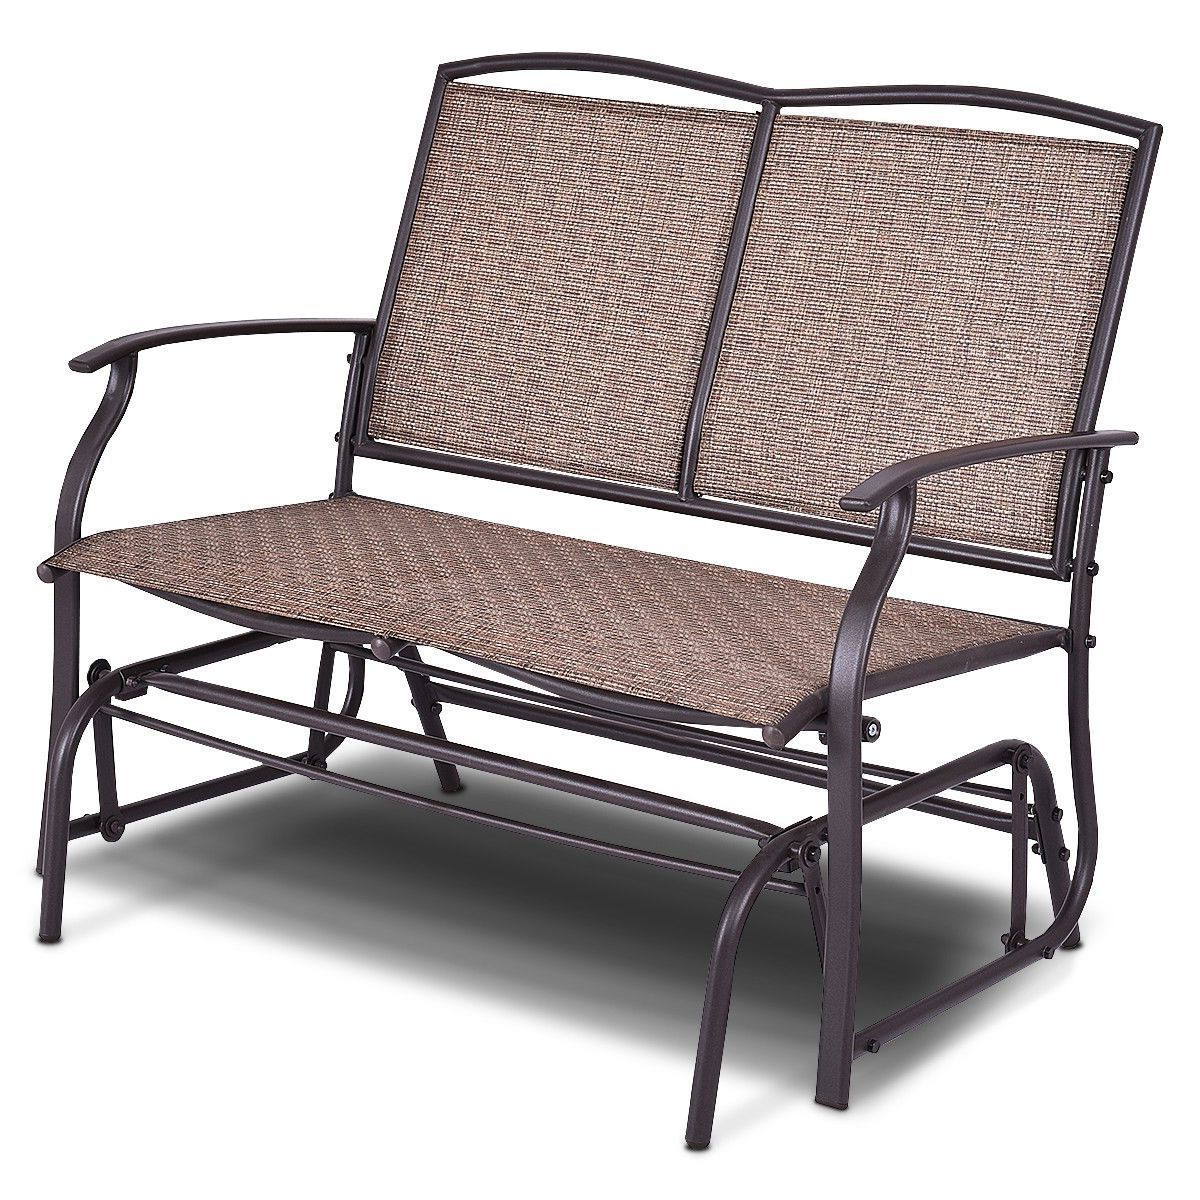 Favorite Patio Glider Rocking 2 Person Outdoor Bench In 2019 With Outdoor Patio Swing Glider Bench Chair S (View 2 of 30)